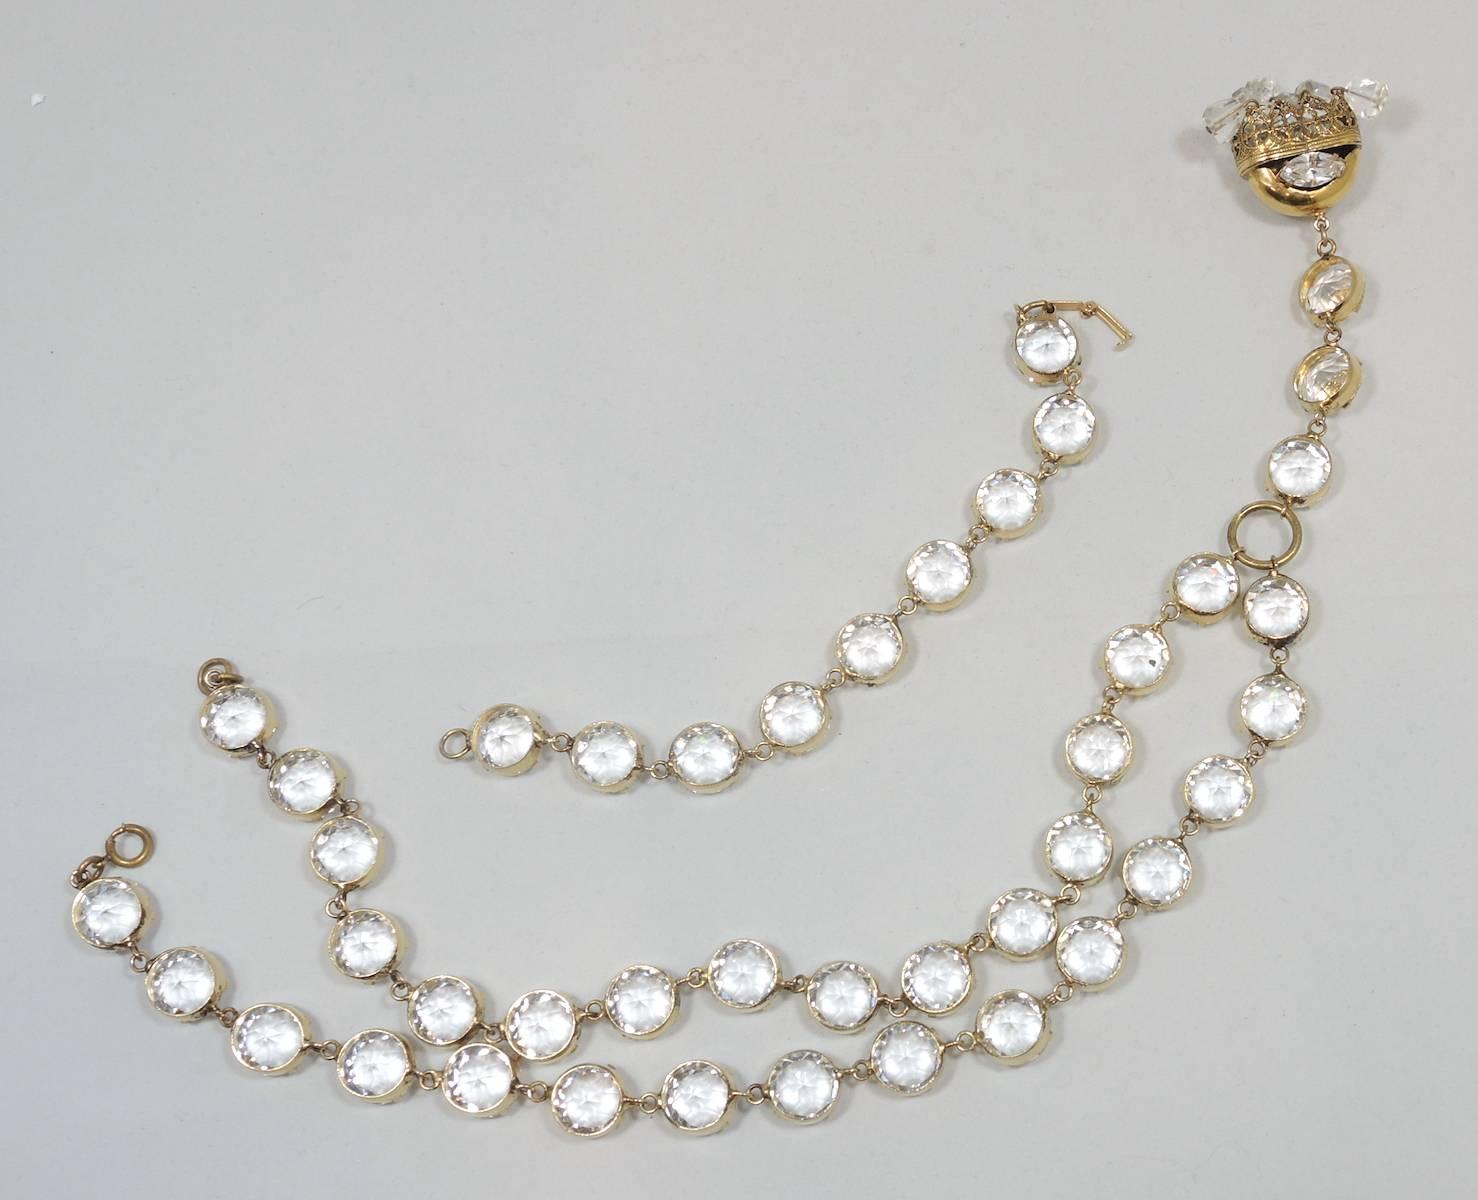 This Deco necklace is rare and will definitely have people looking at you! It has 32 large faceted open back crystals pronged onto gold tone borders. The crystals lead down to an ornate centerpiece that has a marquis crystal on each side and 8